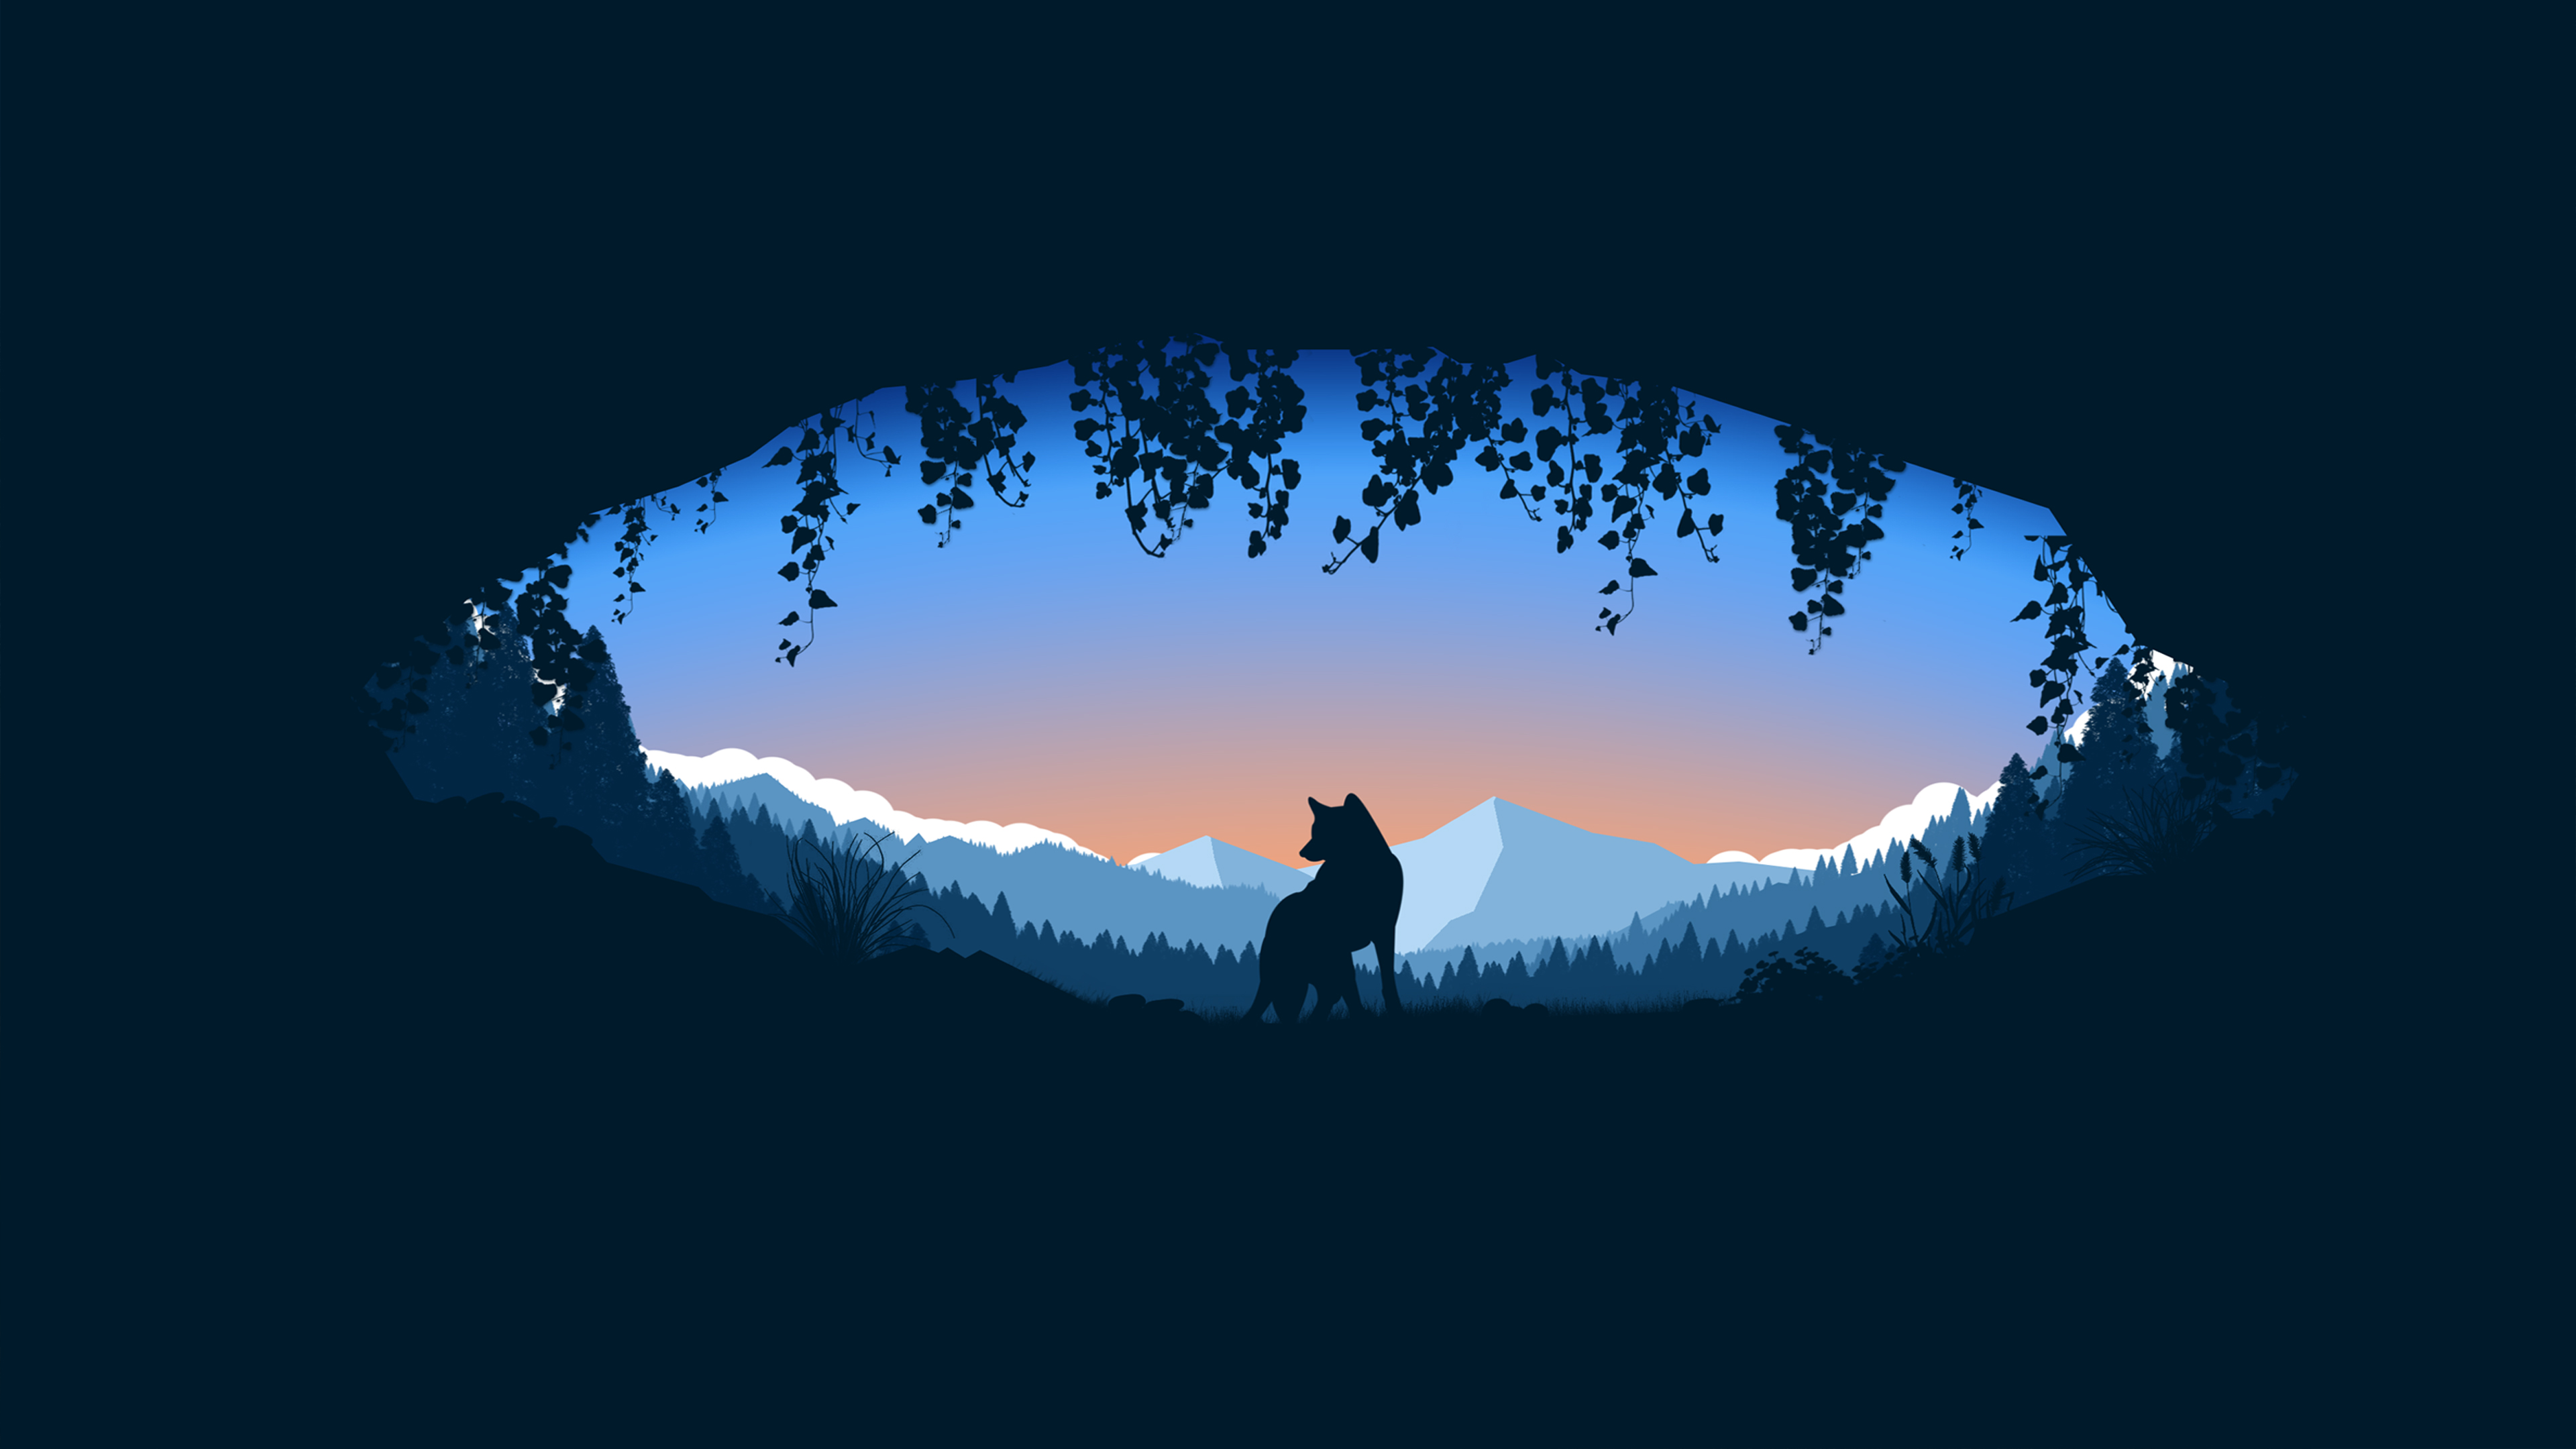 Cool Backgrounds wolf, artistic, cave Minimalism